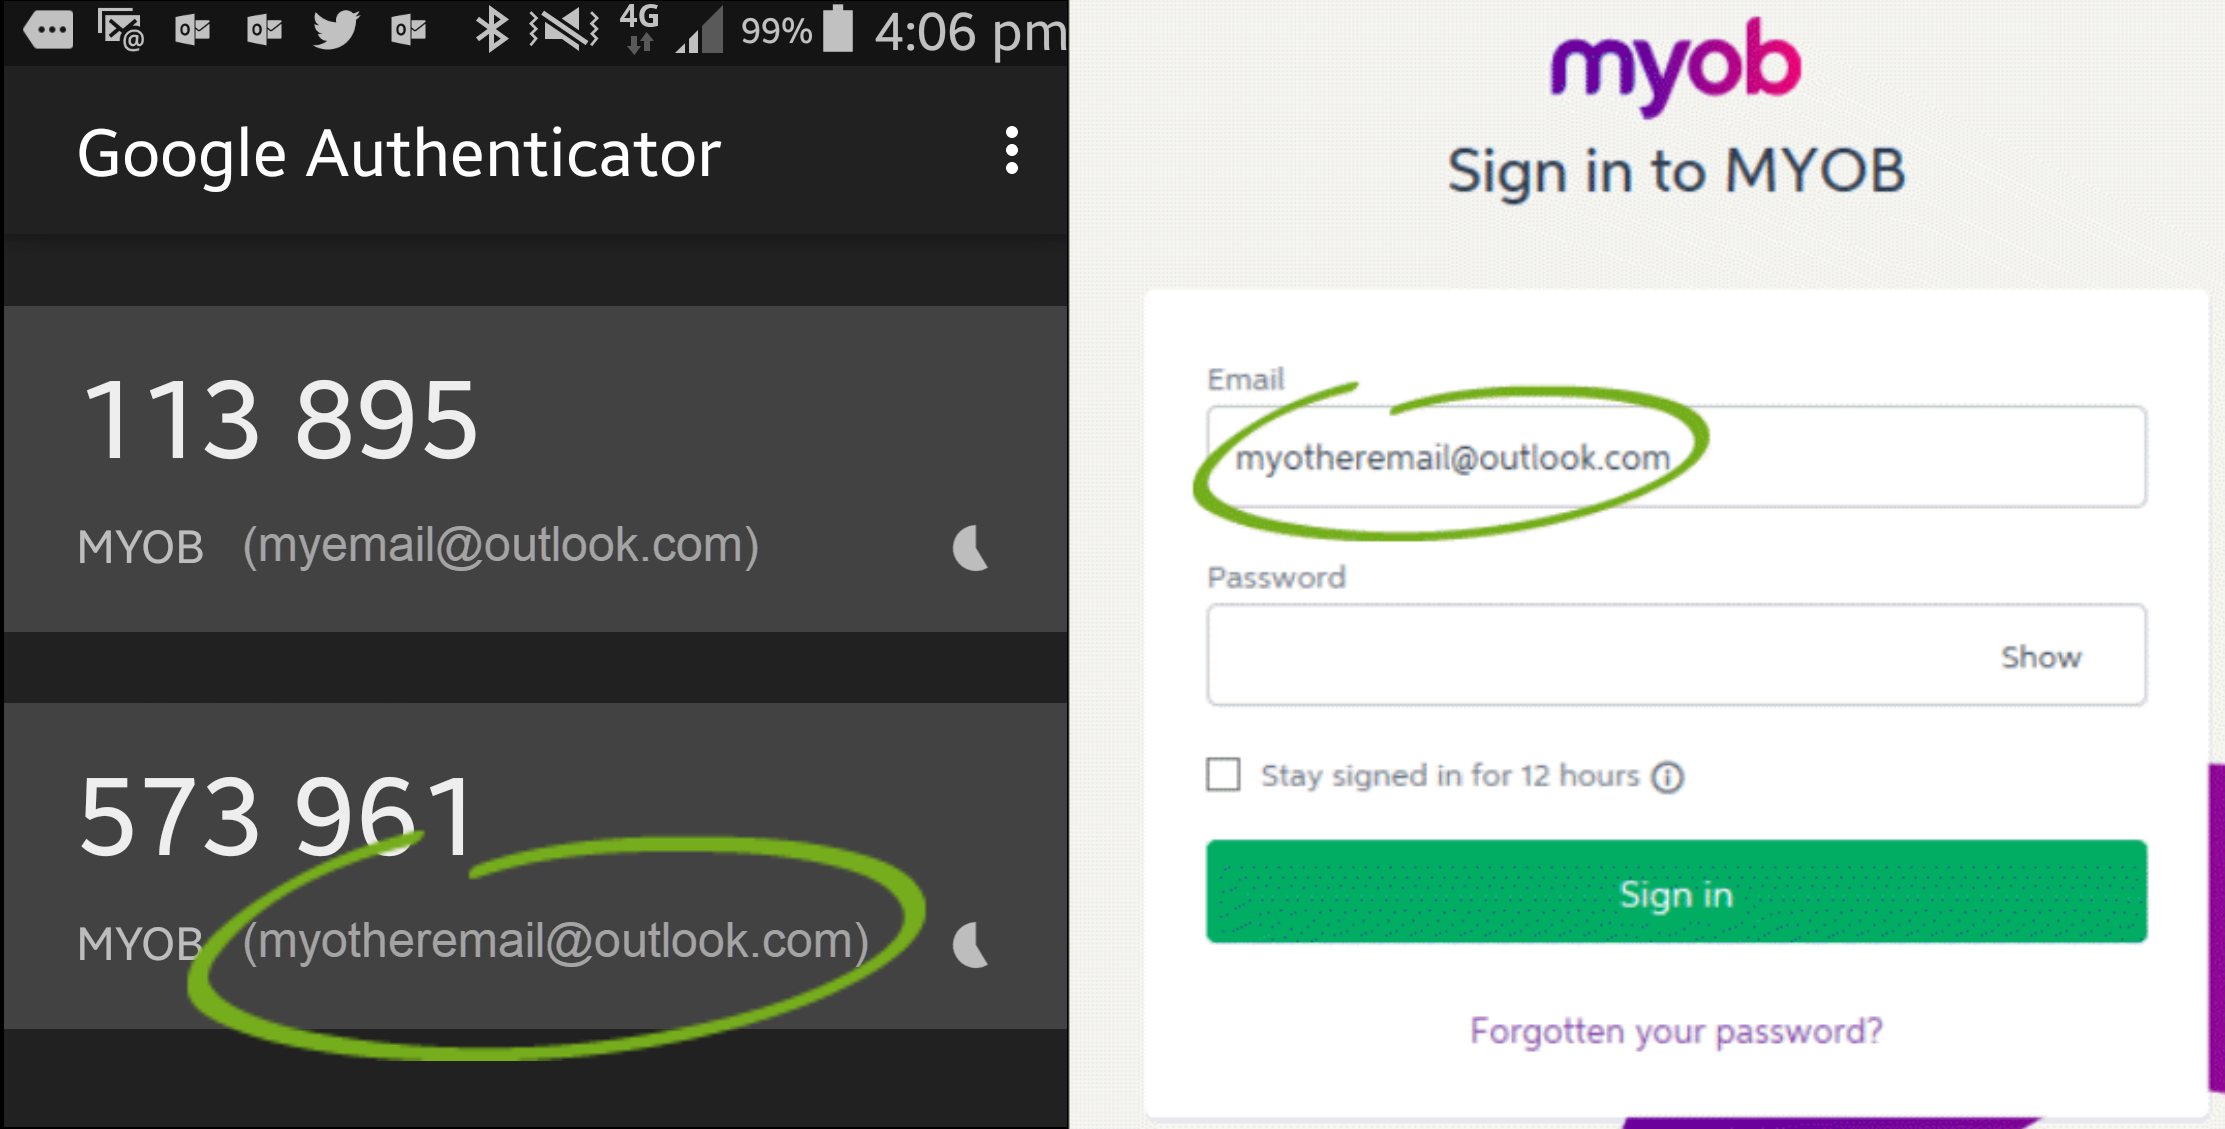 Ensure your MYOB login email matches your 2FA account